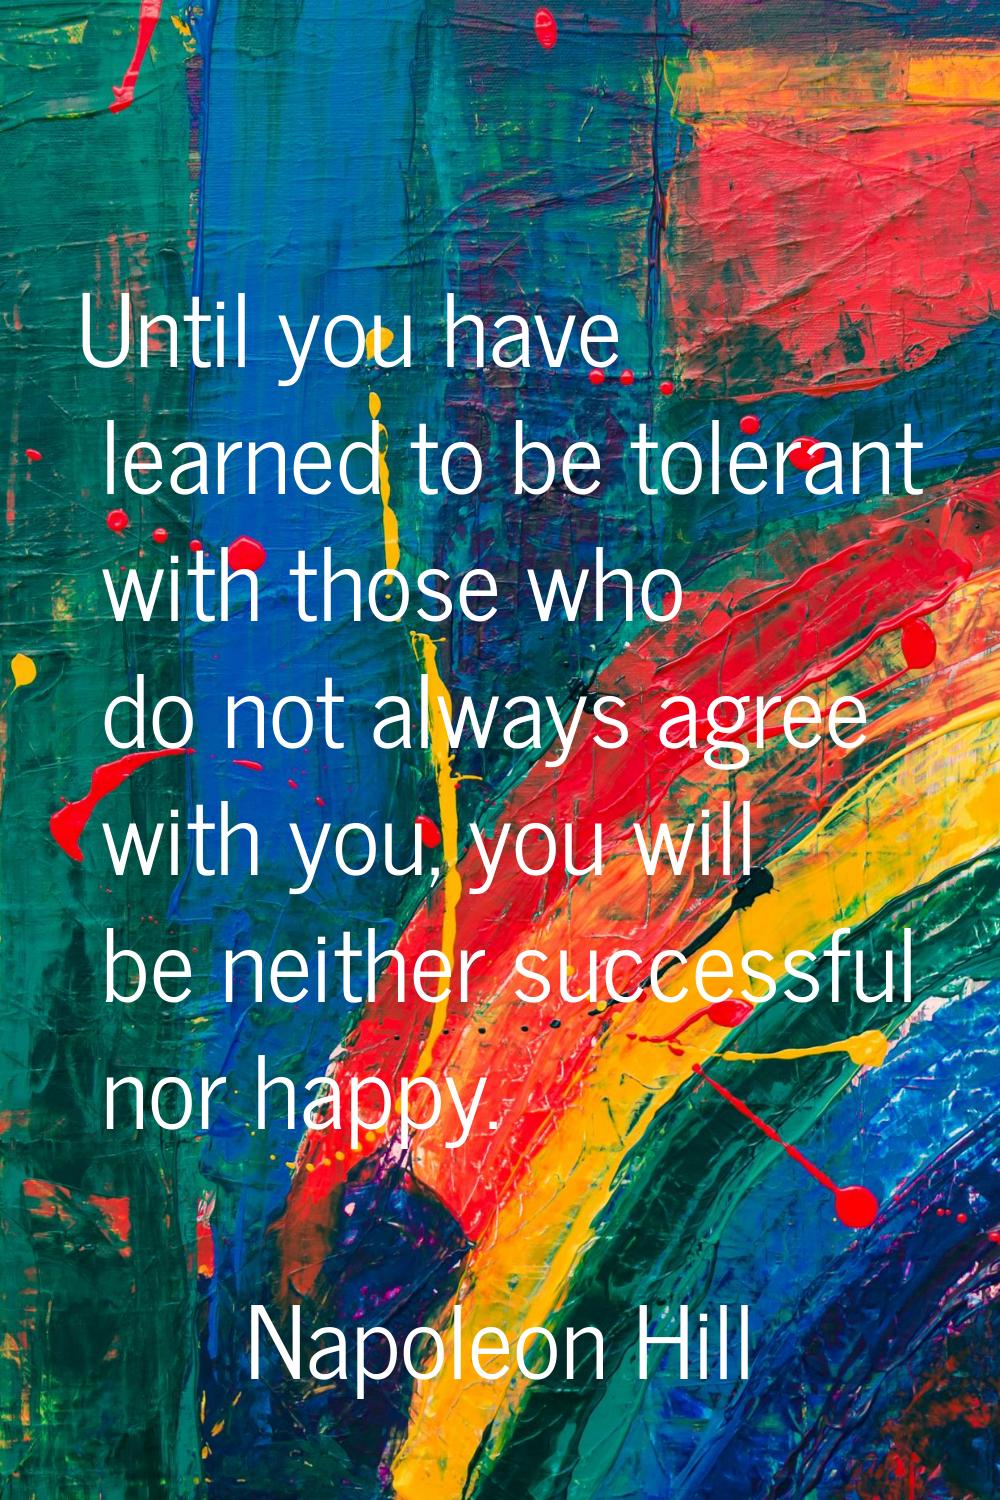 Until you have learned to be tolerant with those who do not always agree with you, you will be neit